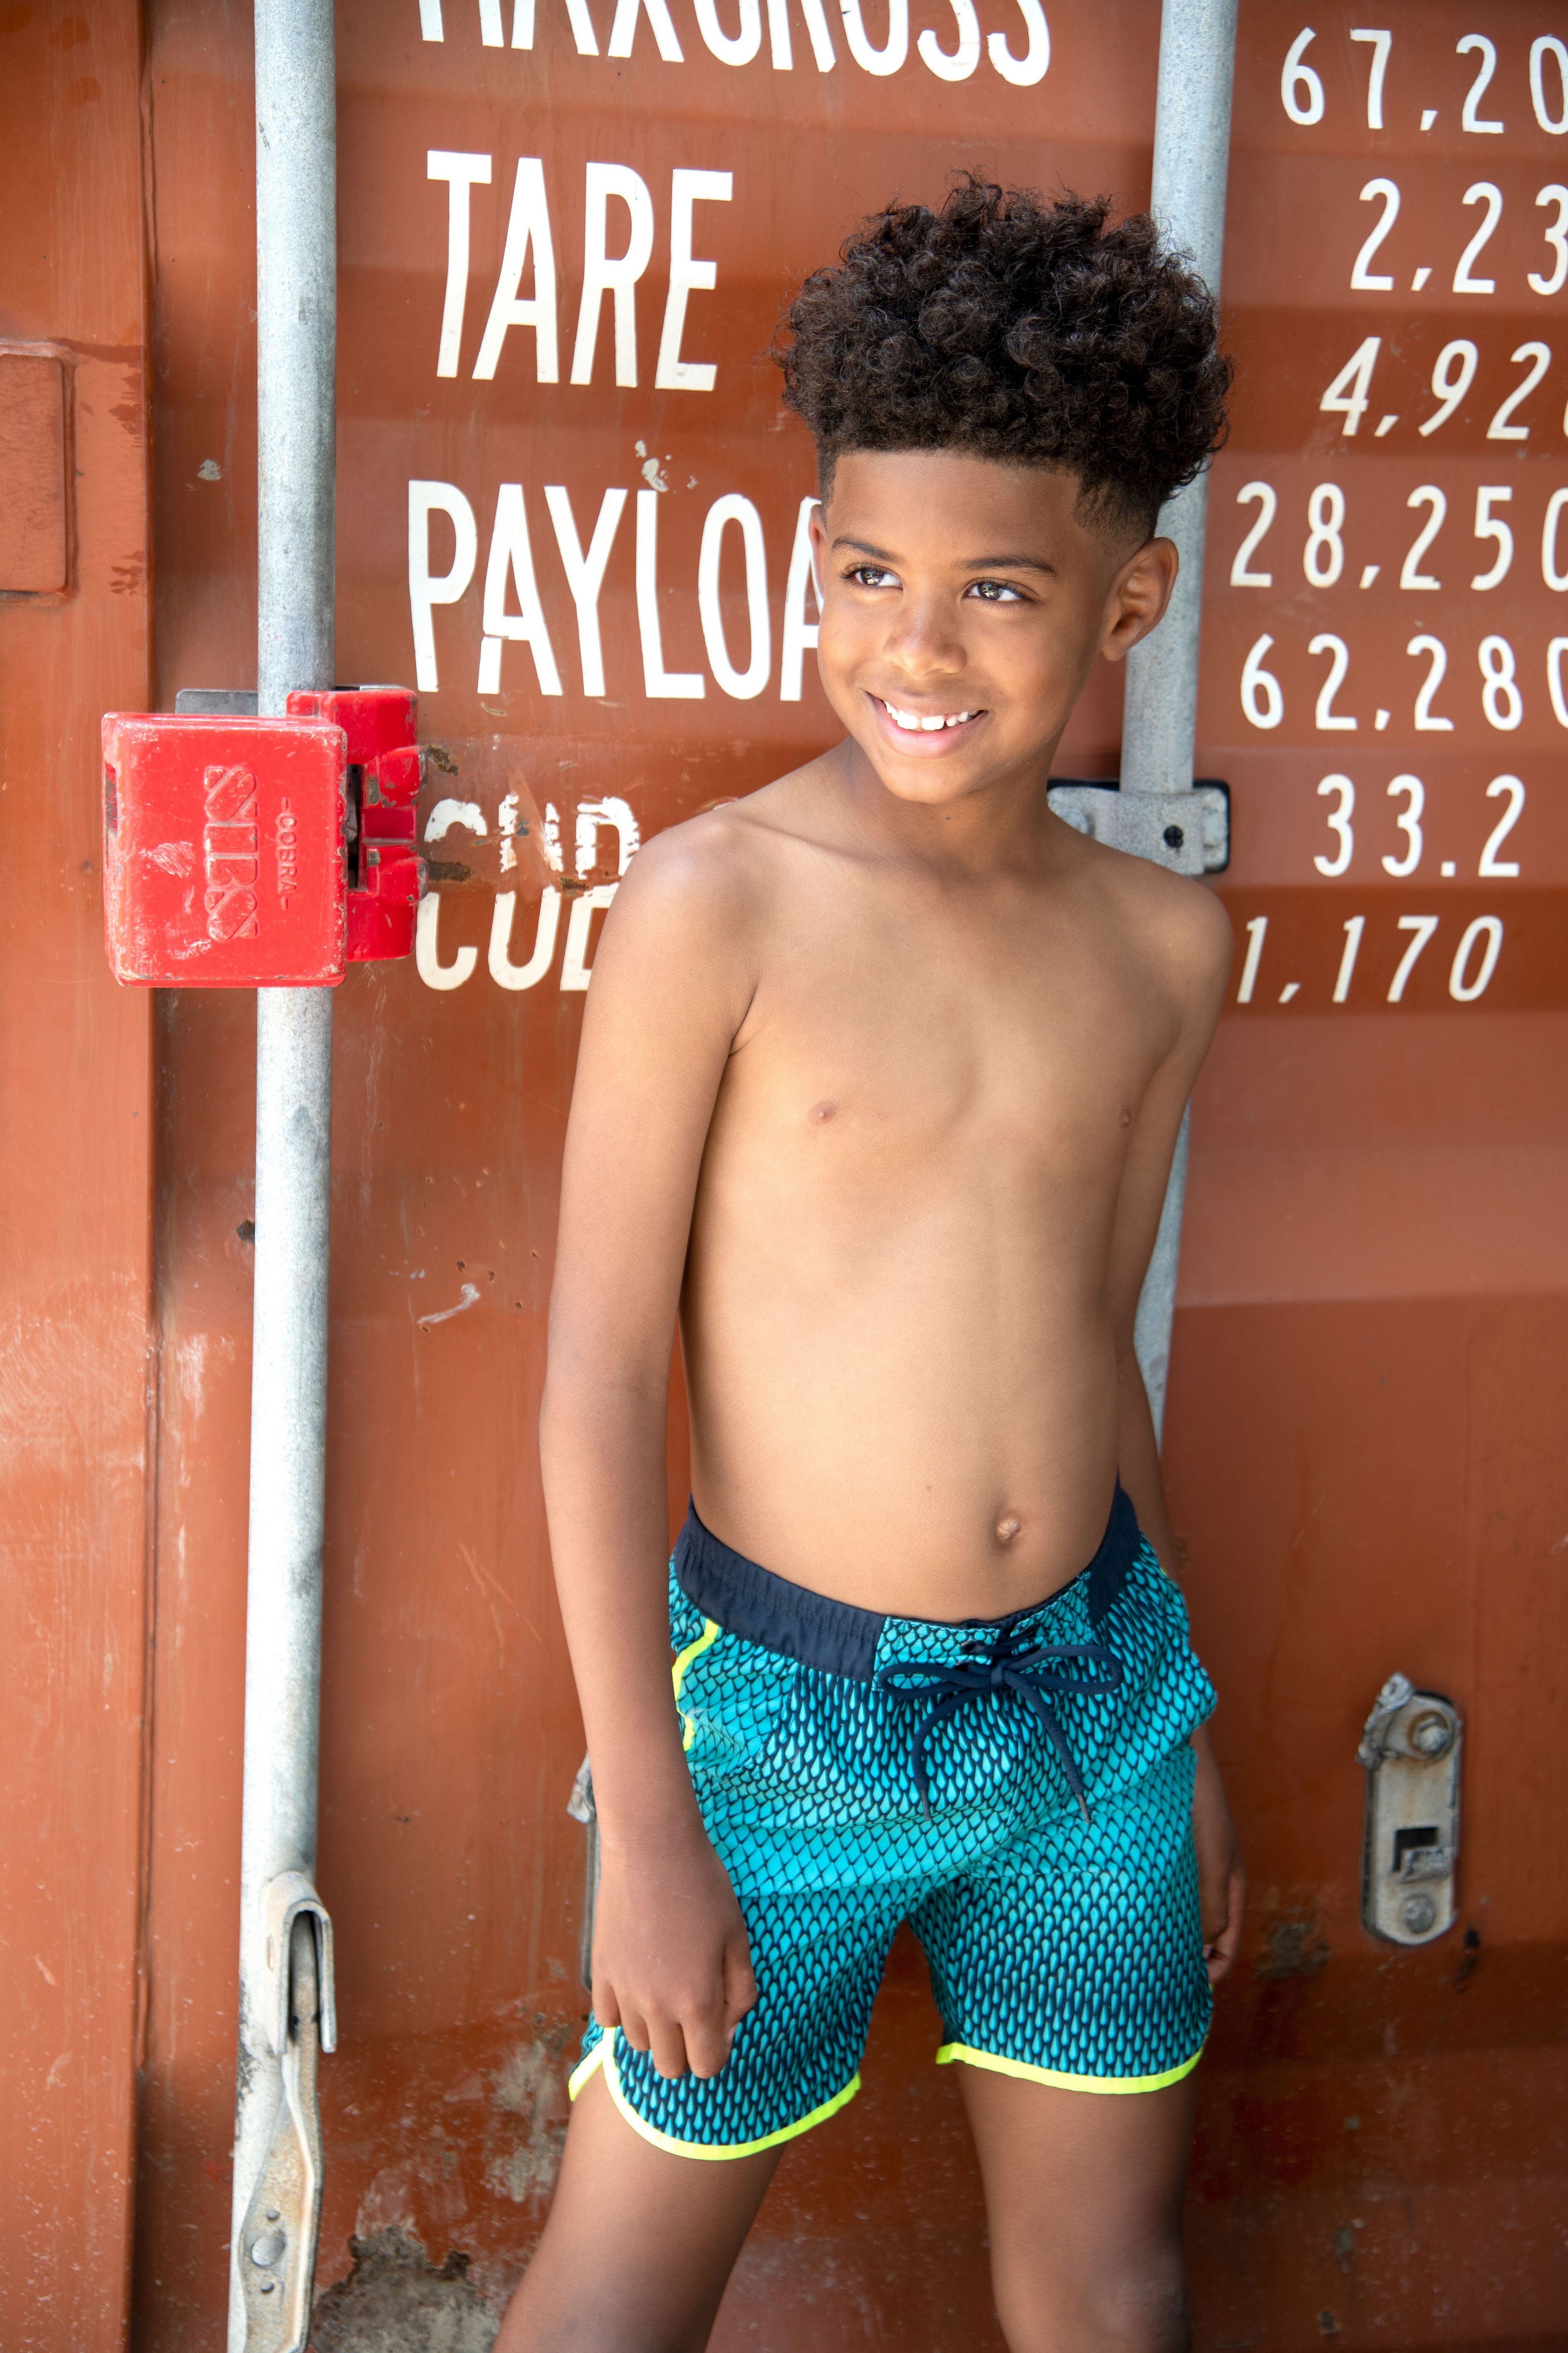 Boys woven swimshort with aop and contrast binding